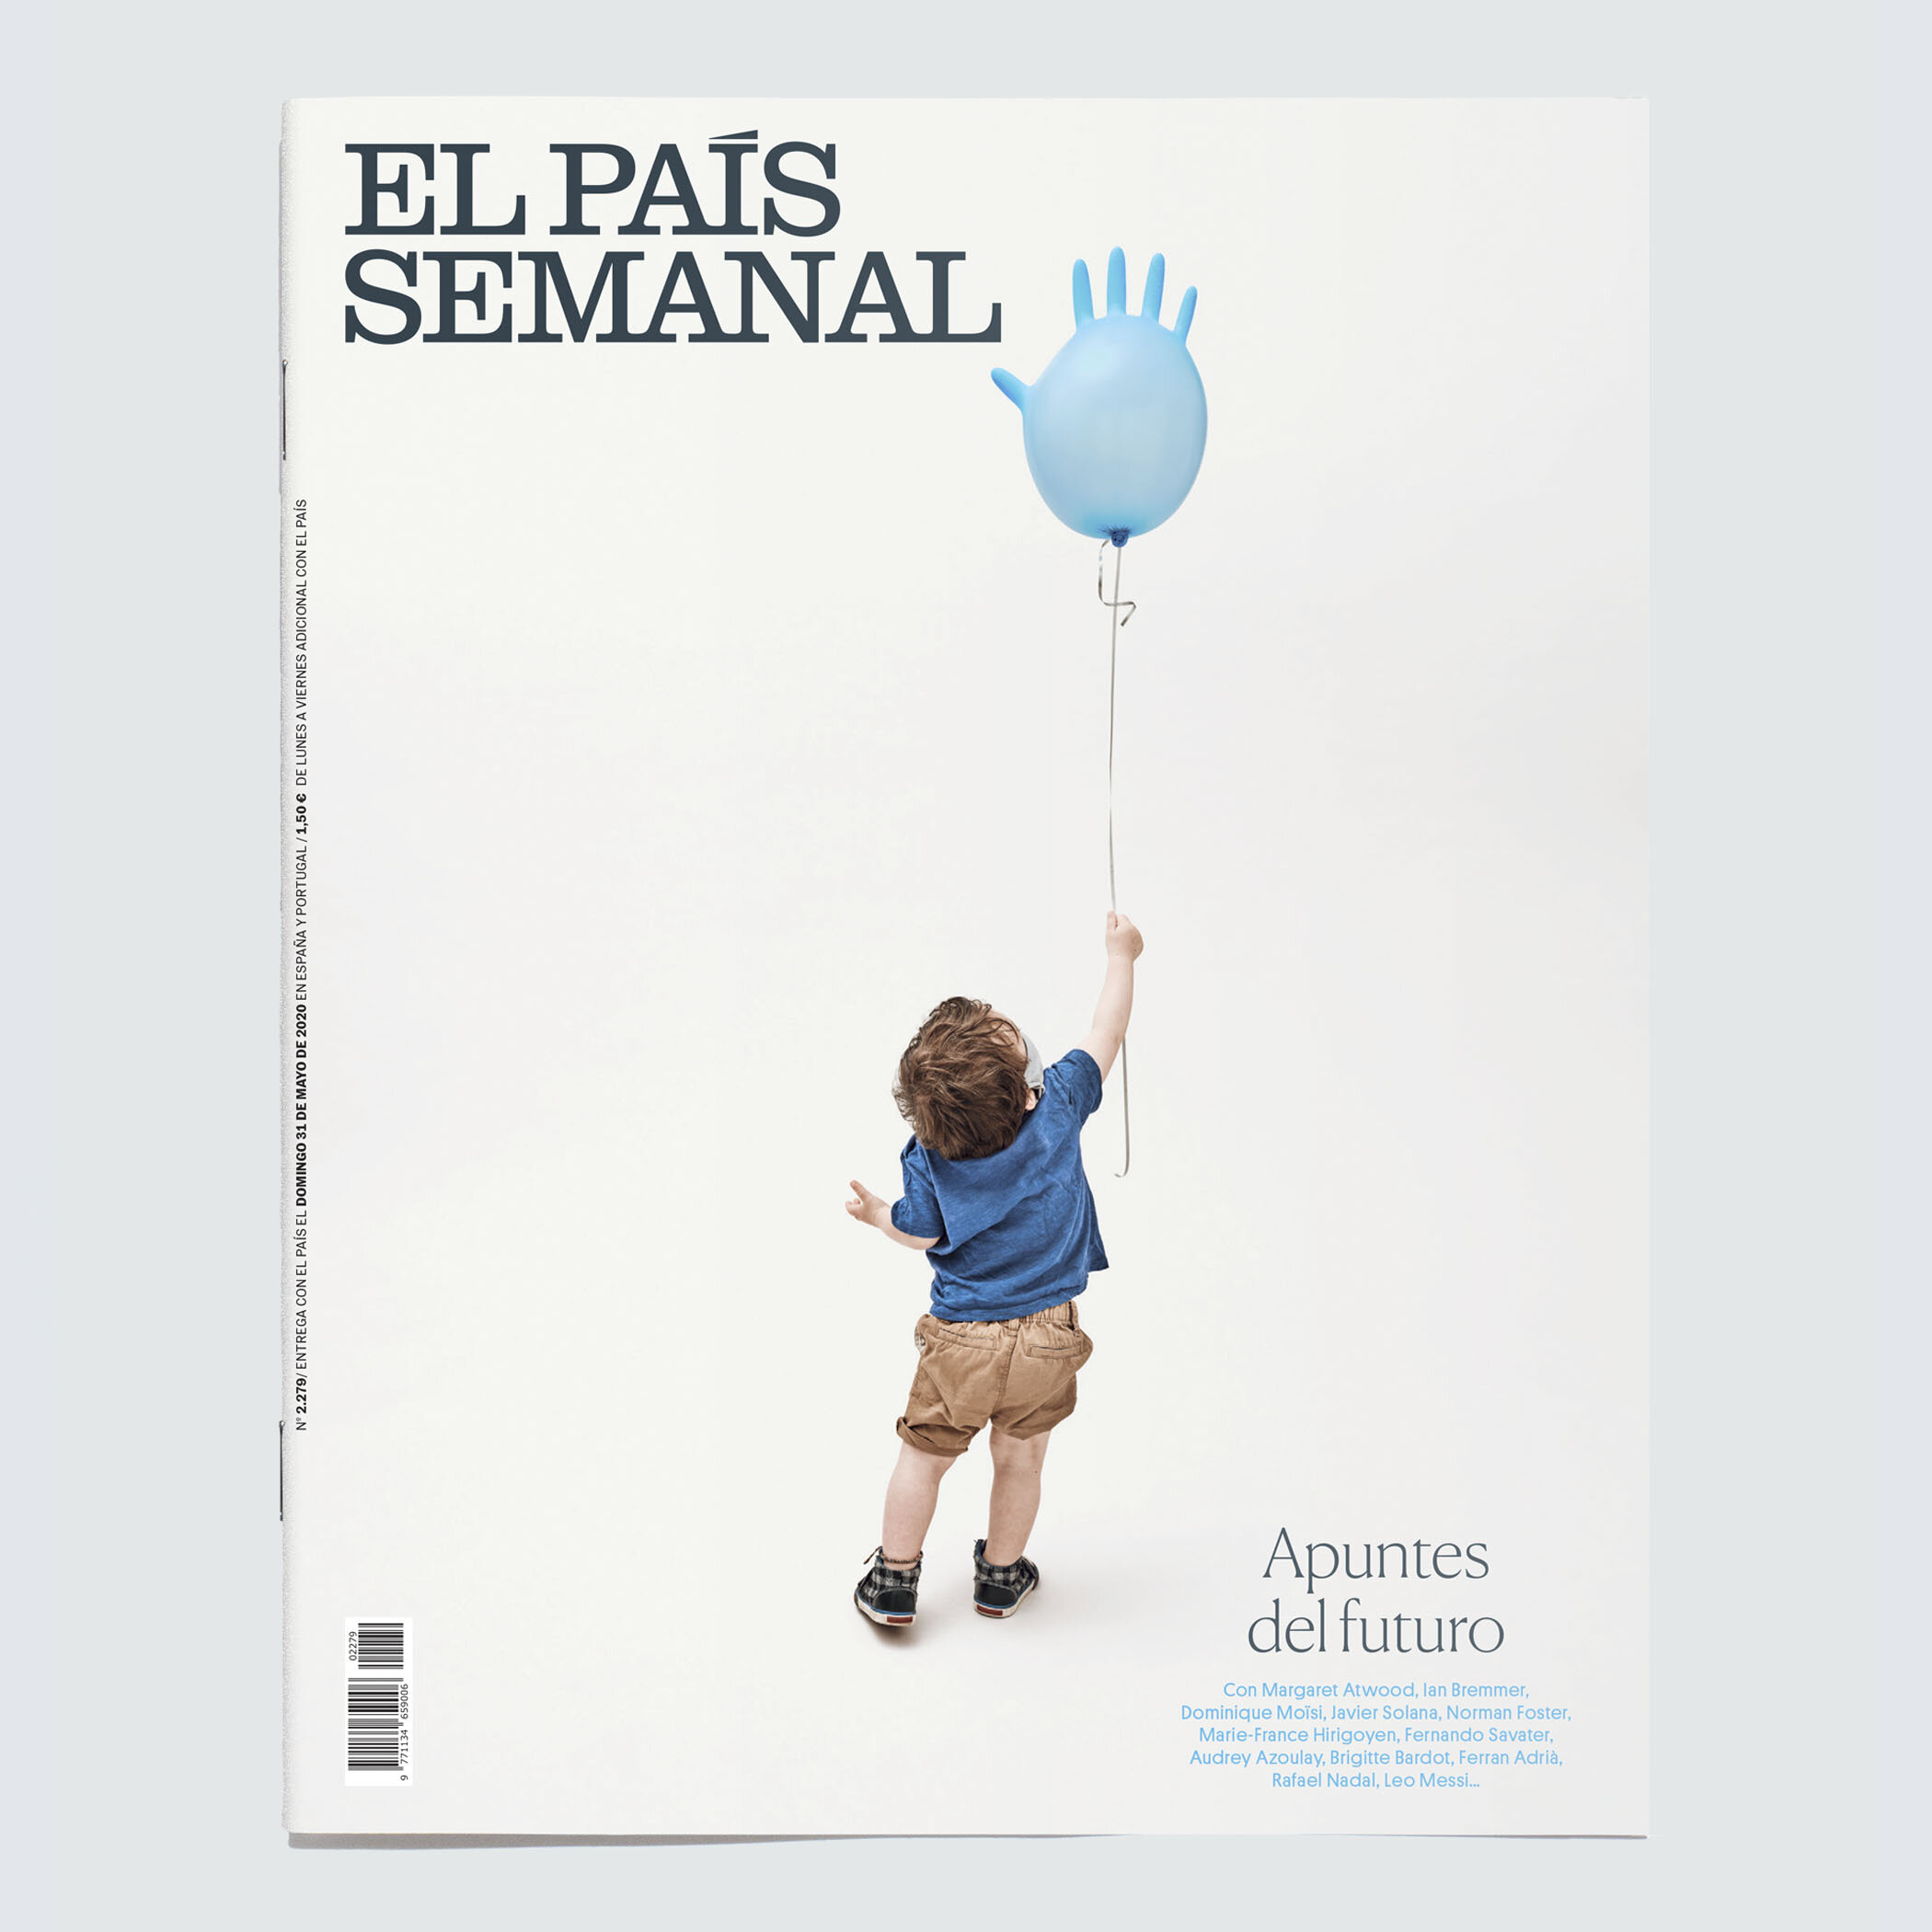 EL PAIS SEMANAL MAY 2020 / CONCEPT BY DELCAN &amp; CO. / PHOTOGRAPHED BY JAMIE CHUNG / ON THE COVER: RÍO DELCAN